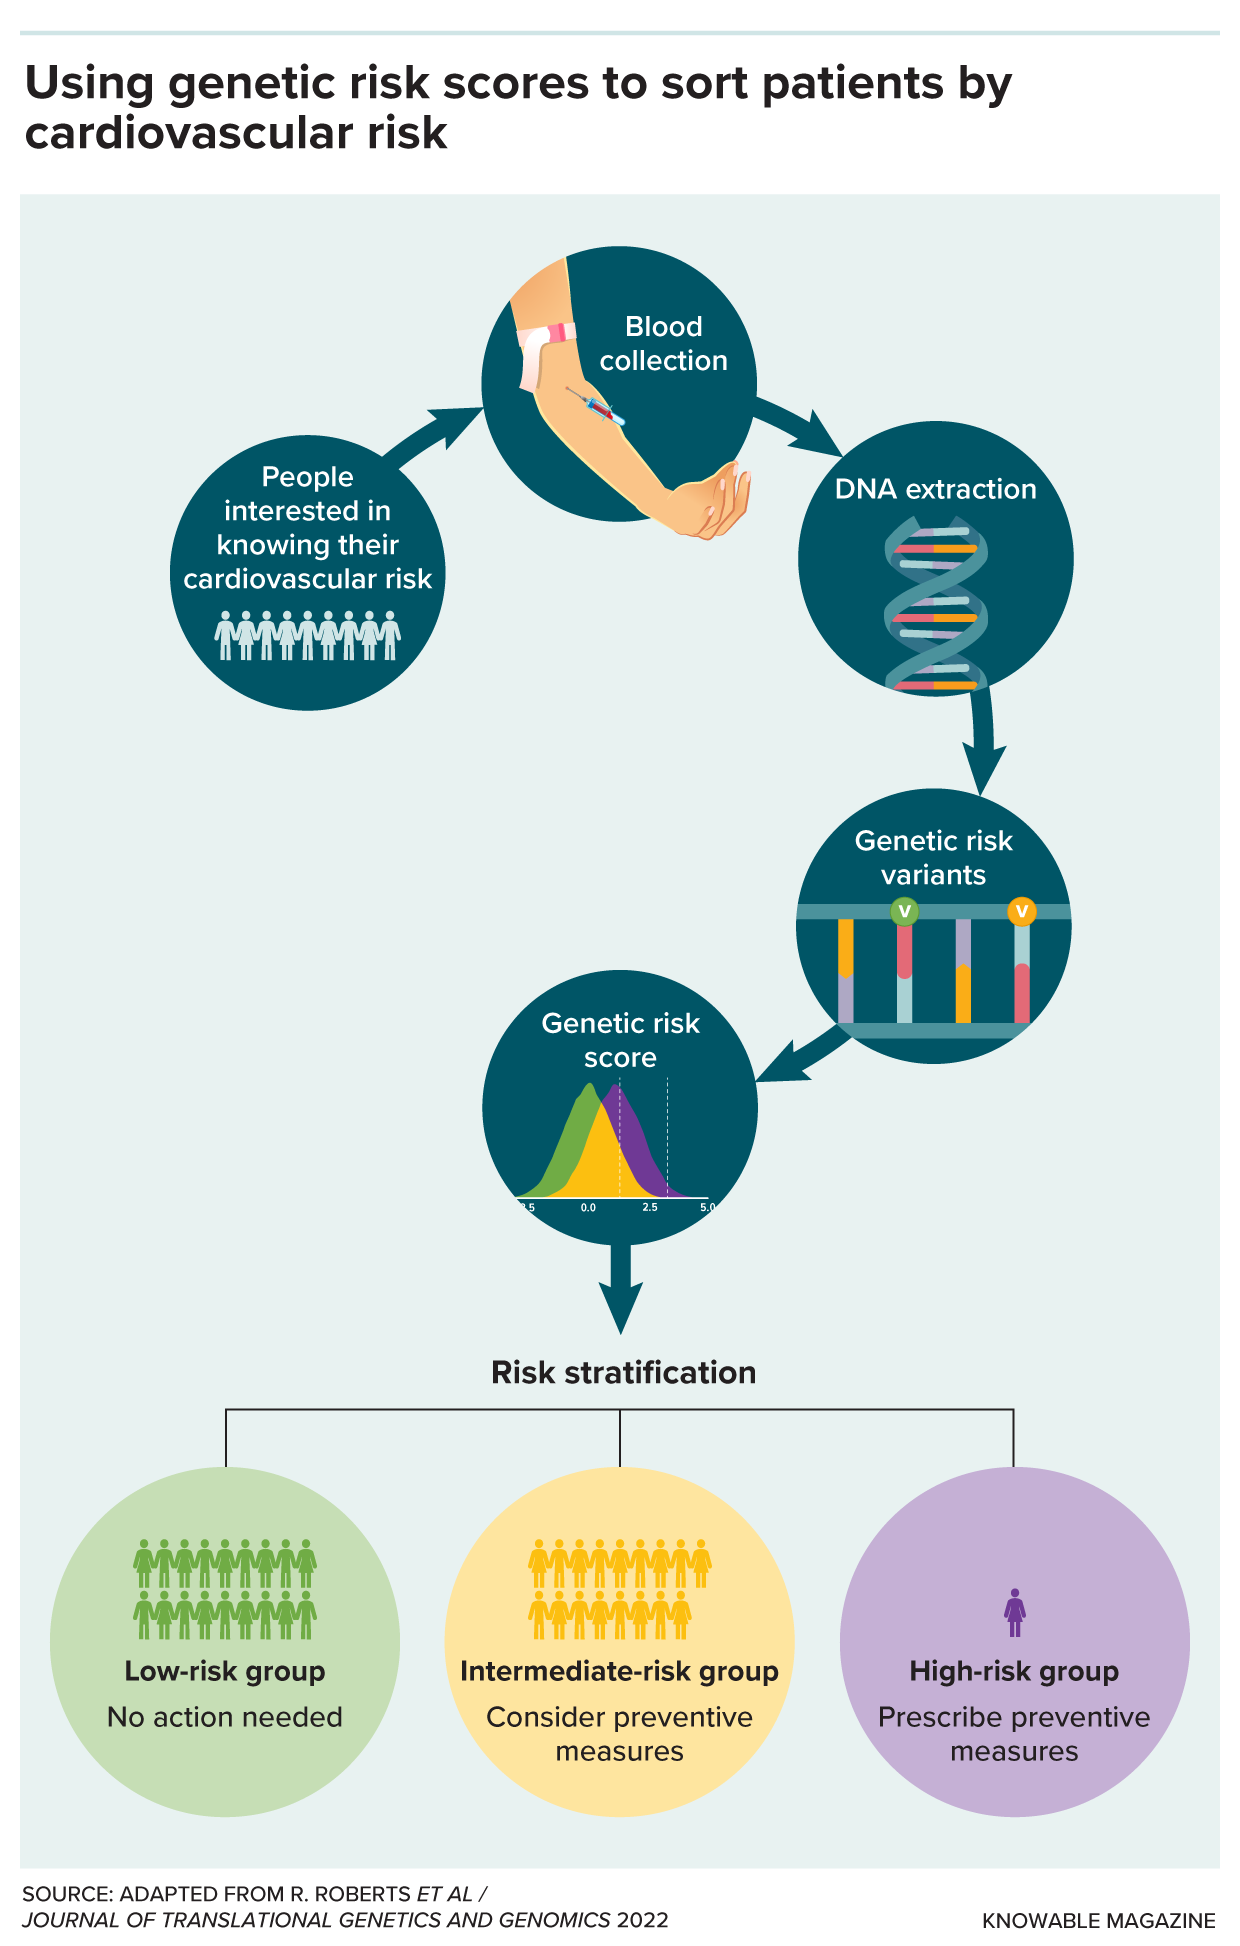 Diagram describes polygenic risk scores for cardiovascular disease in a group of patients. Icons show three results: a low-risk group with no action needed, an intermediate risk group that might consider preventive measures, and a minority in a high-risk group that will likely be prescribed preventive measures.